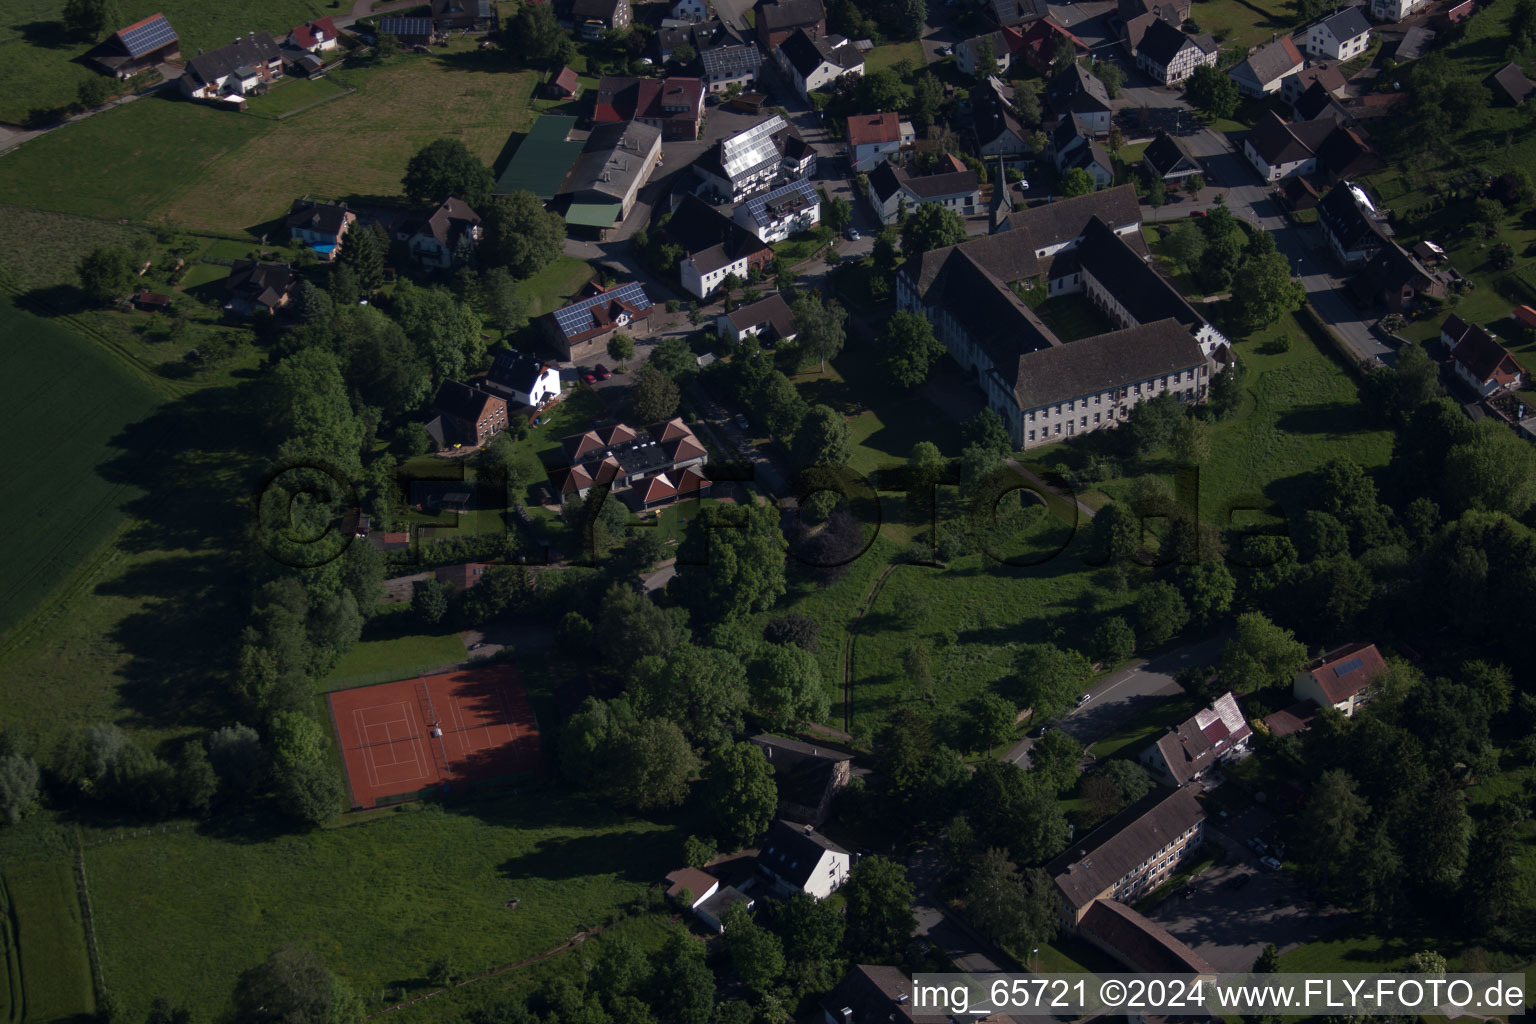 Aerial photograpy of Complex of buildings of the monastery Koptisch-Othodoxes Kloster Propsteistrasse in the district Brenkhausen in Hoexter in the state North Rhine-Westphalia